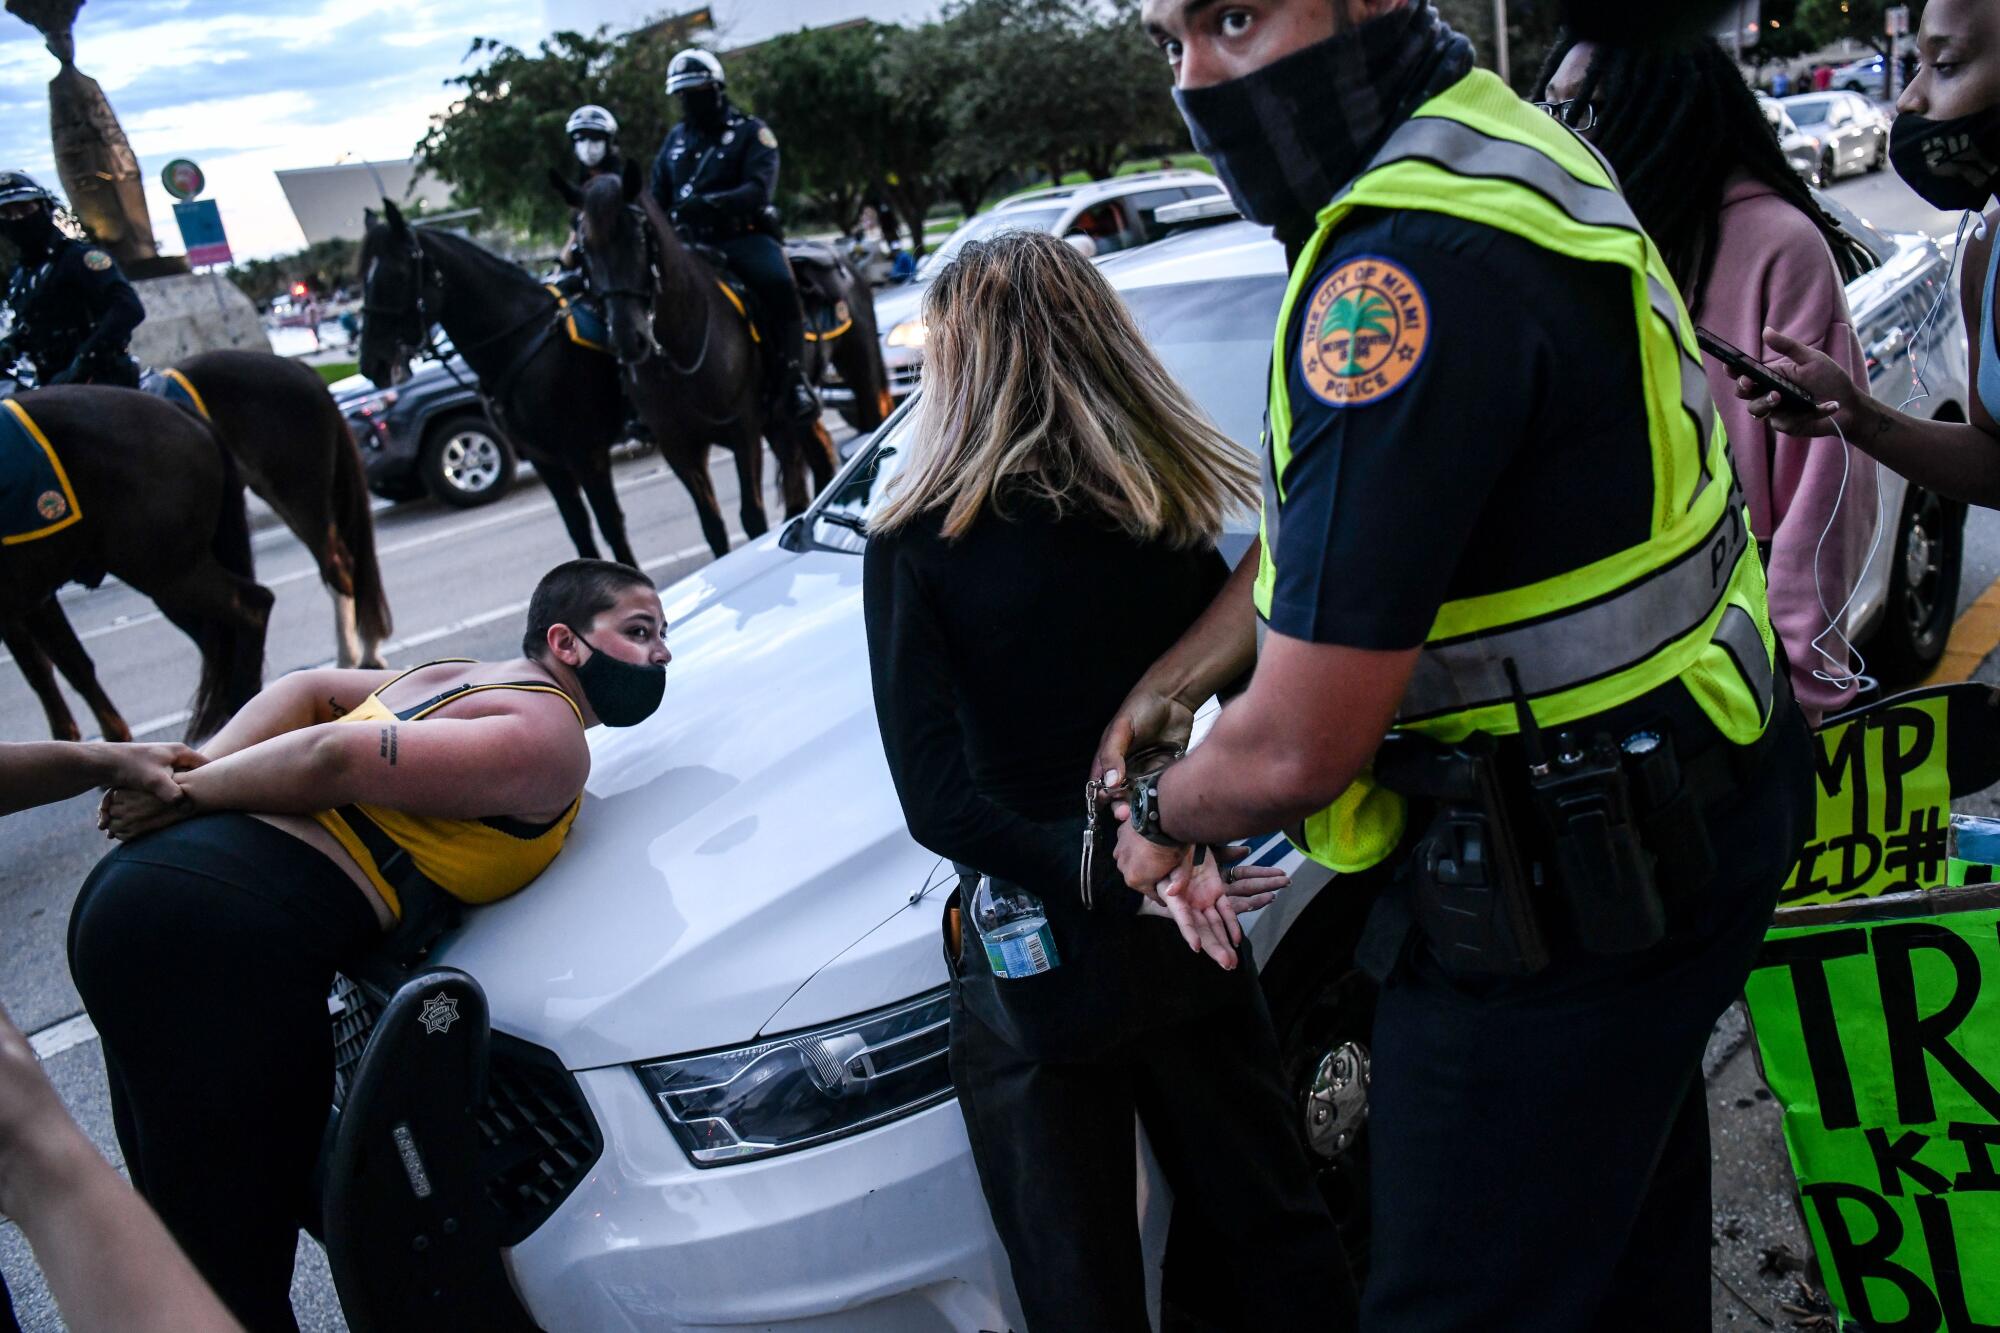 Police arrest protesters over the hood of a police cruiser